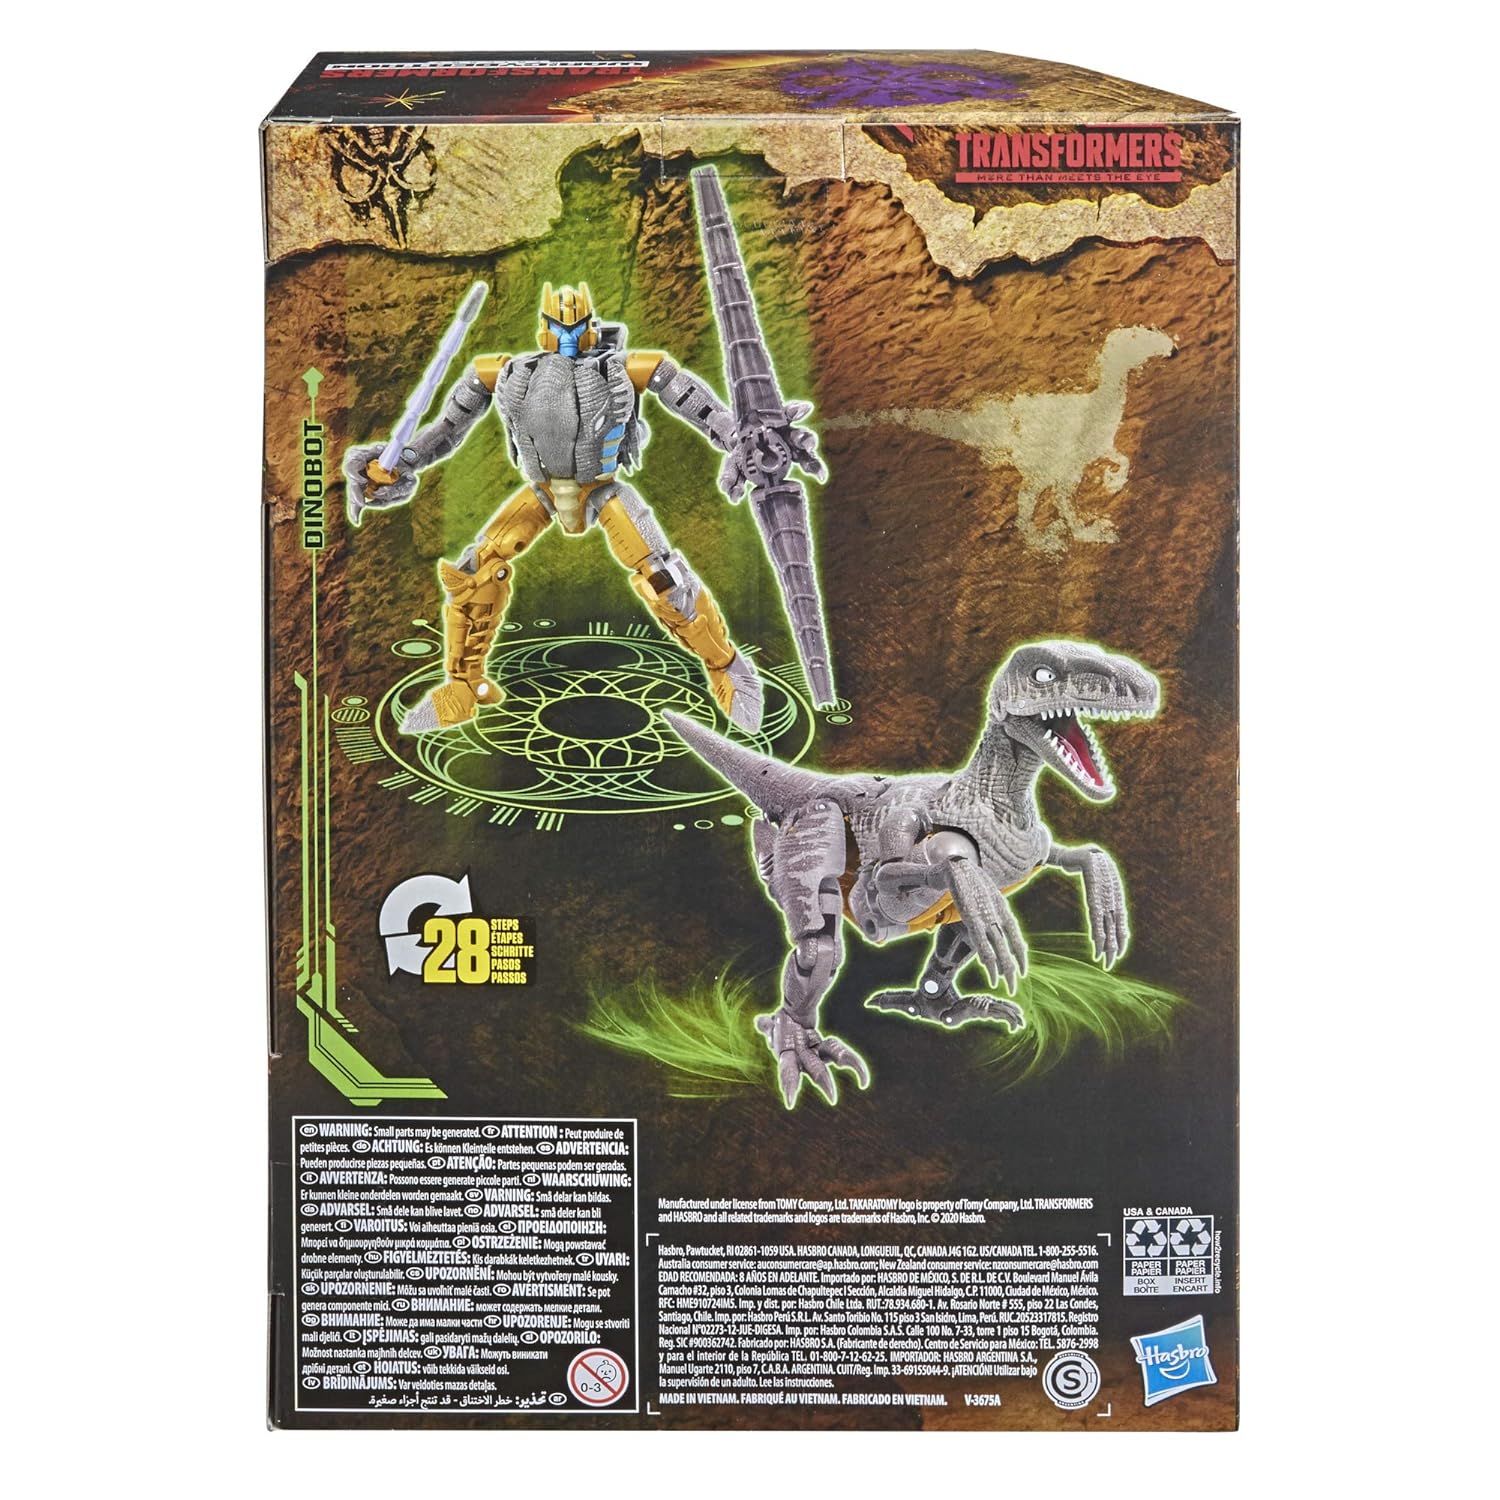 Hasbro Transformers Toys Generations War for Cybertron: Kingdom Voyager WFC-K18 Dinobot Action Figure - Kids Ages 8 and Up, 7-i…